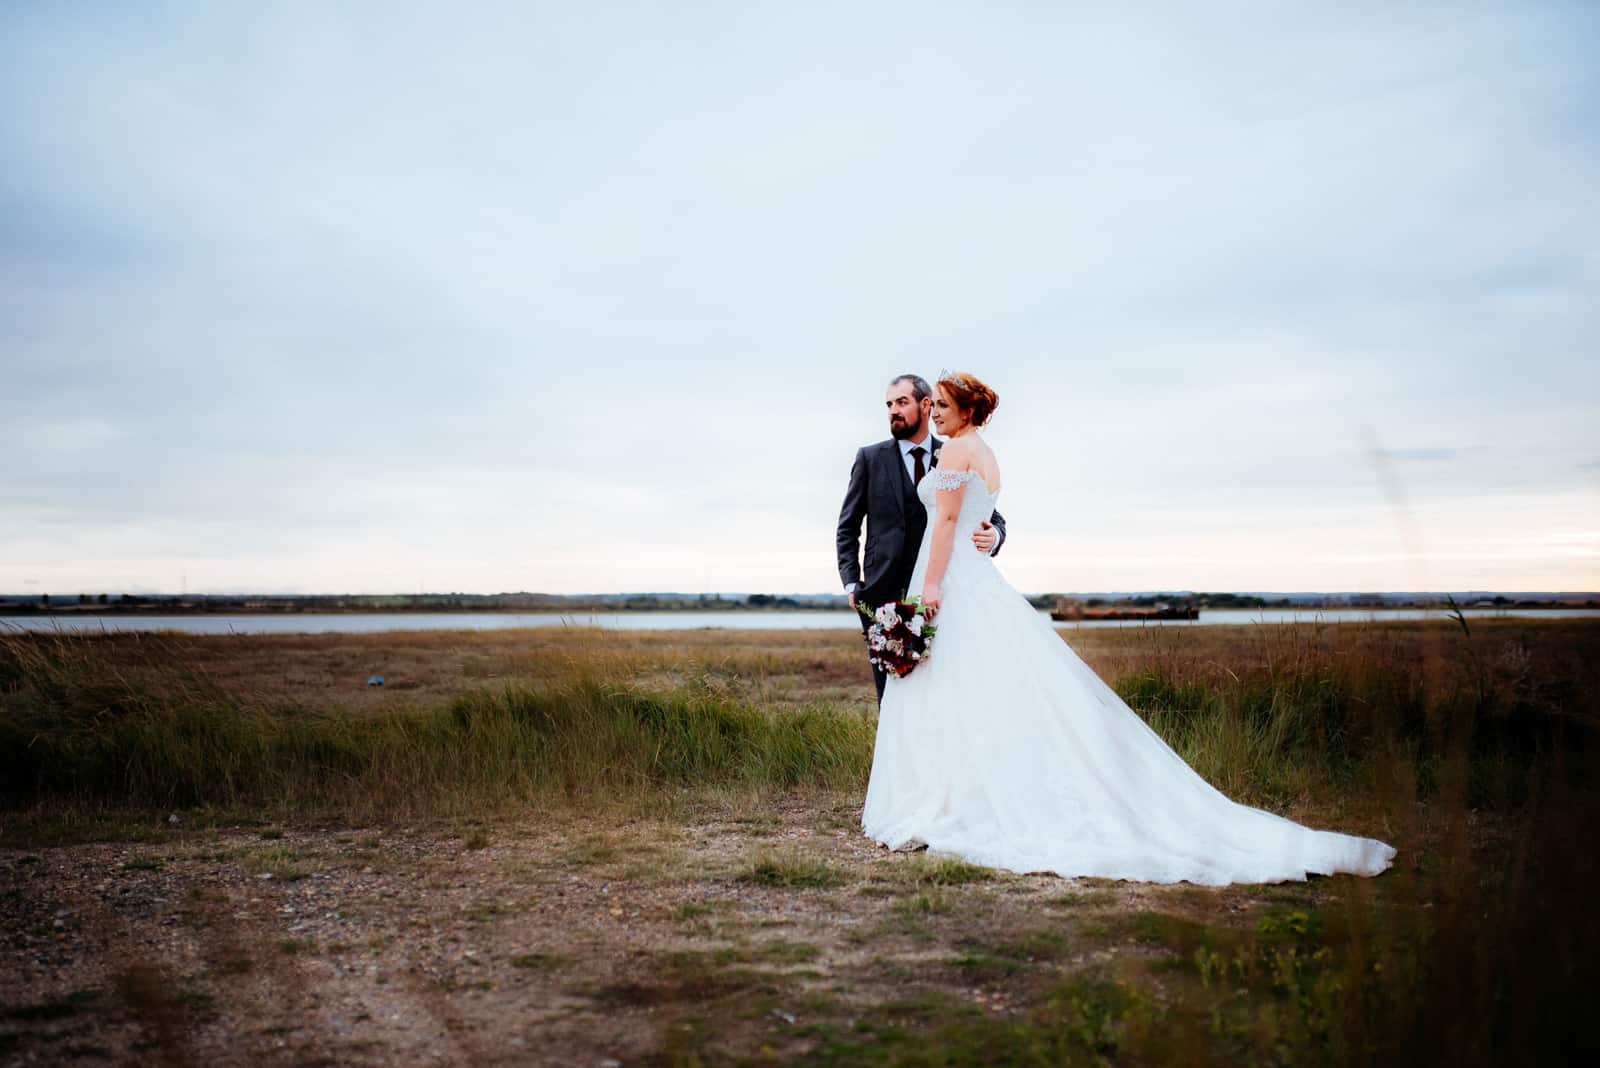 Wedding Photography at The Ferry House, Kent